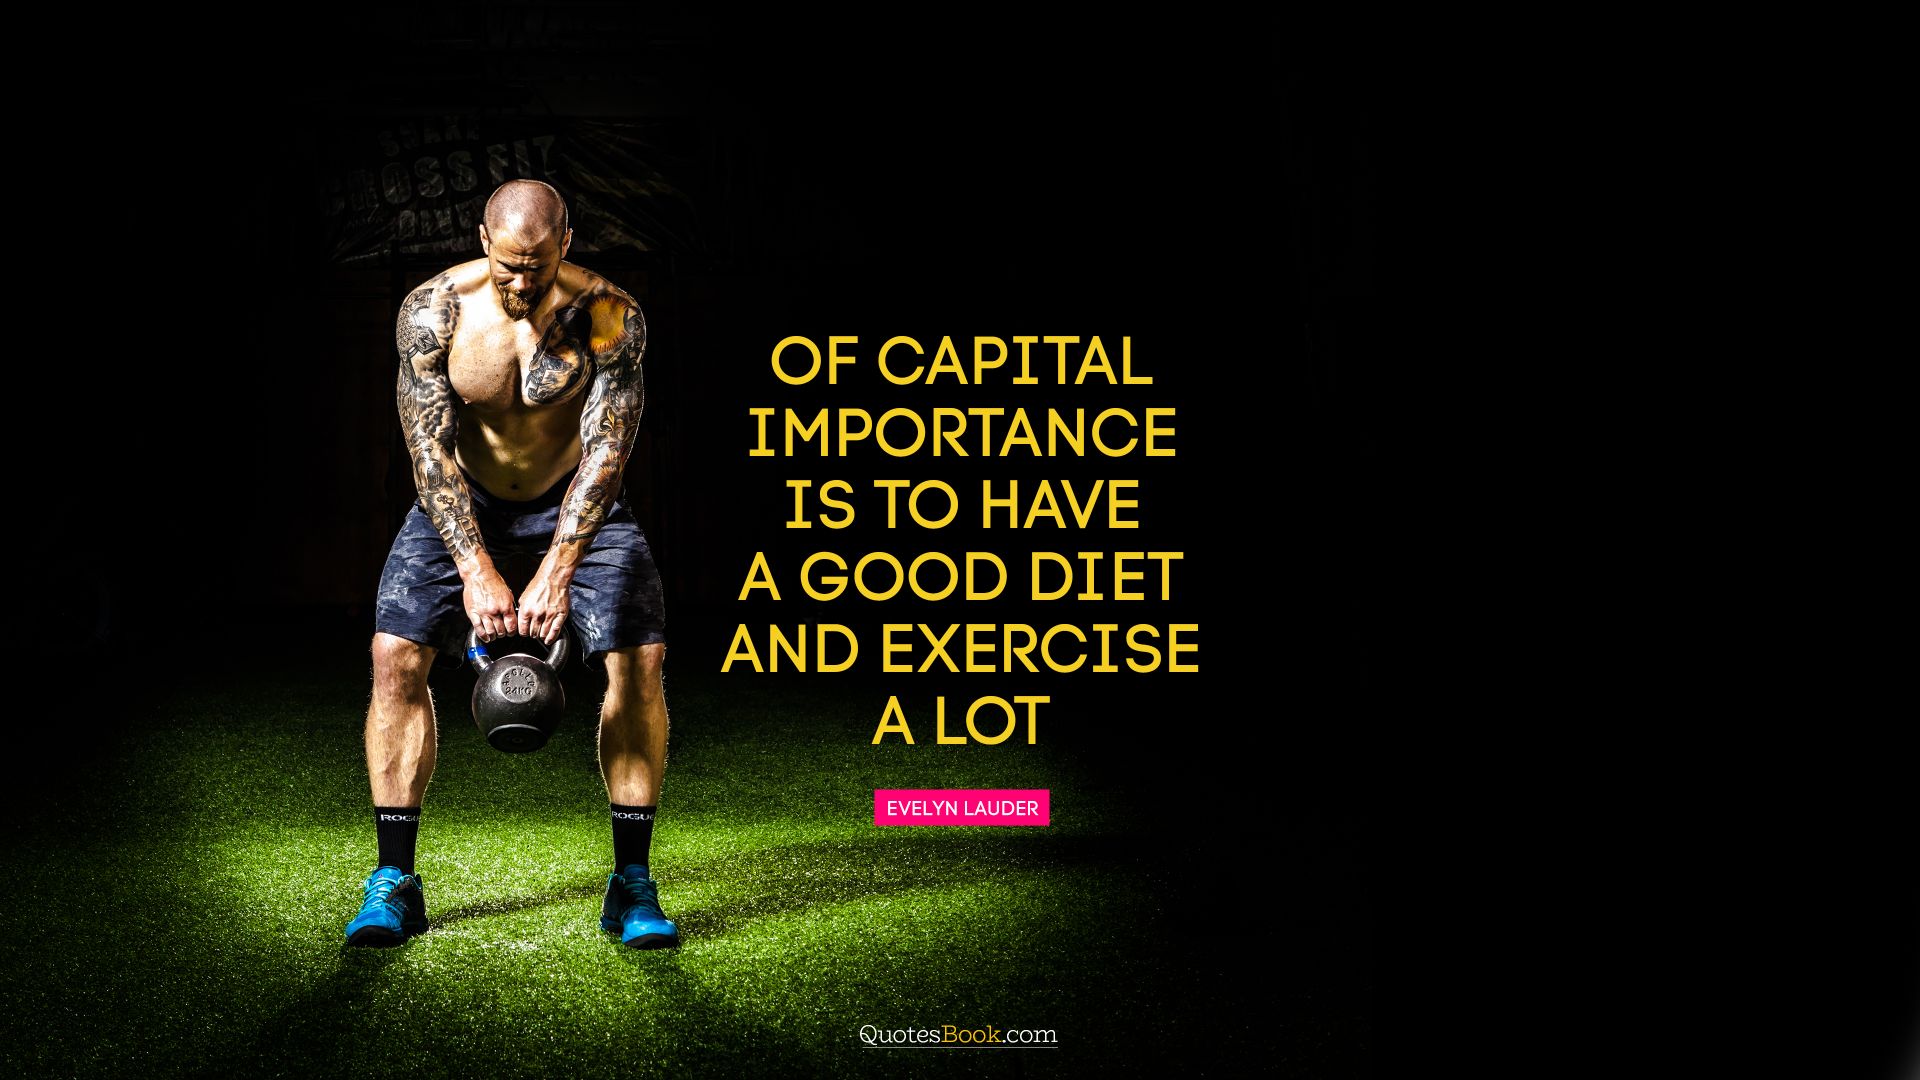 Of capital importance is to have a good diet and exercise a lot. - Quote by Evelyn Lauder